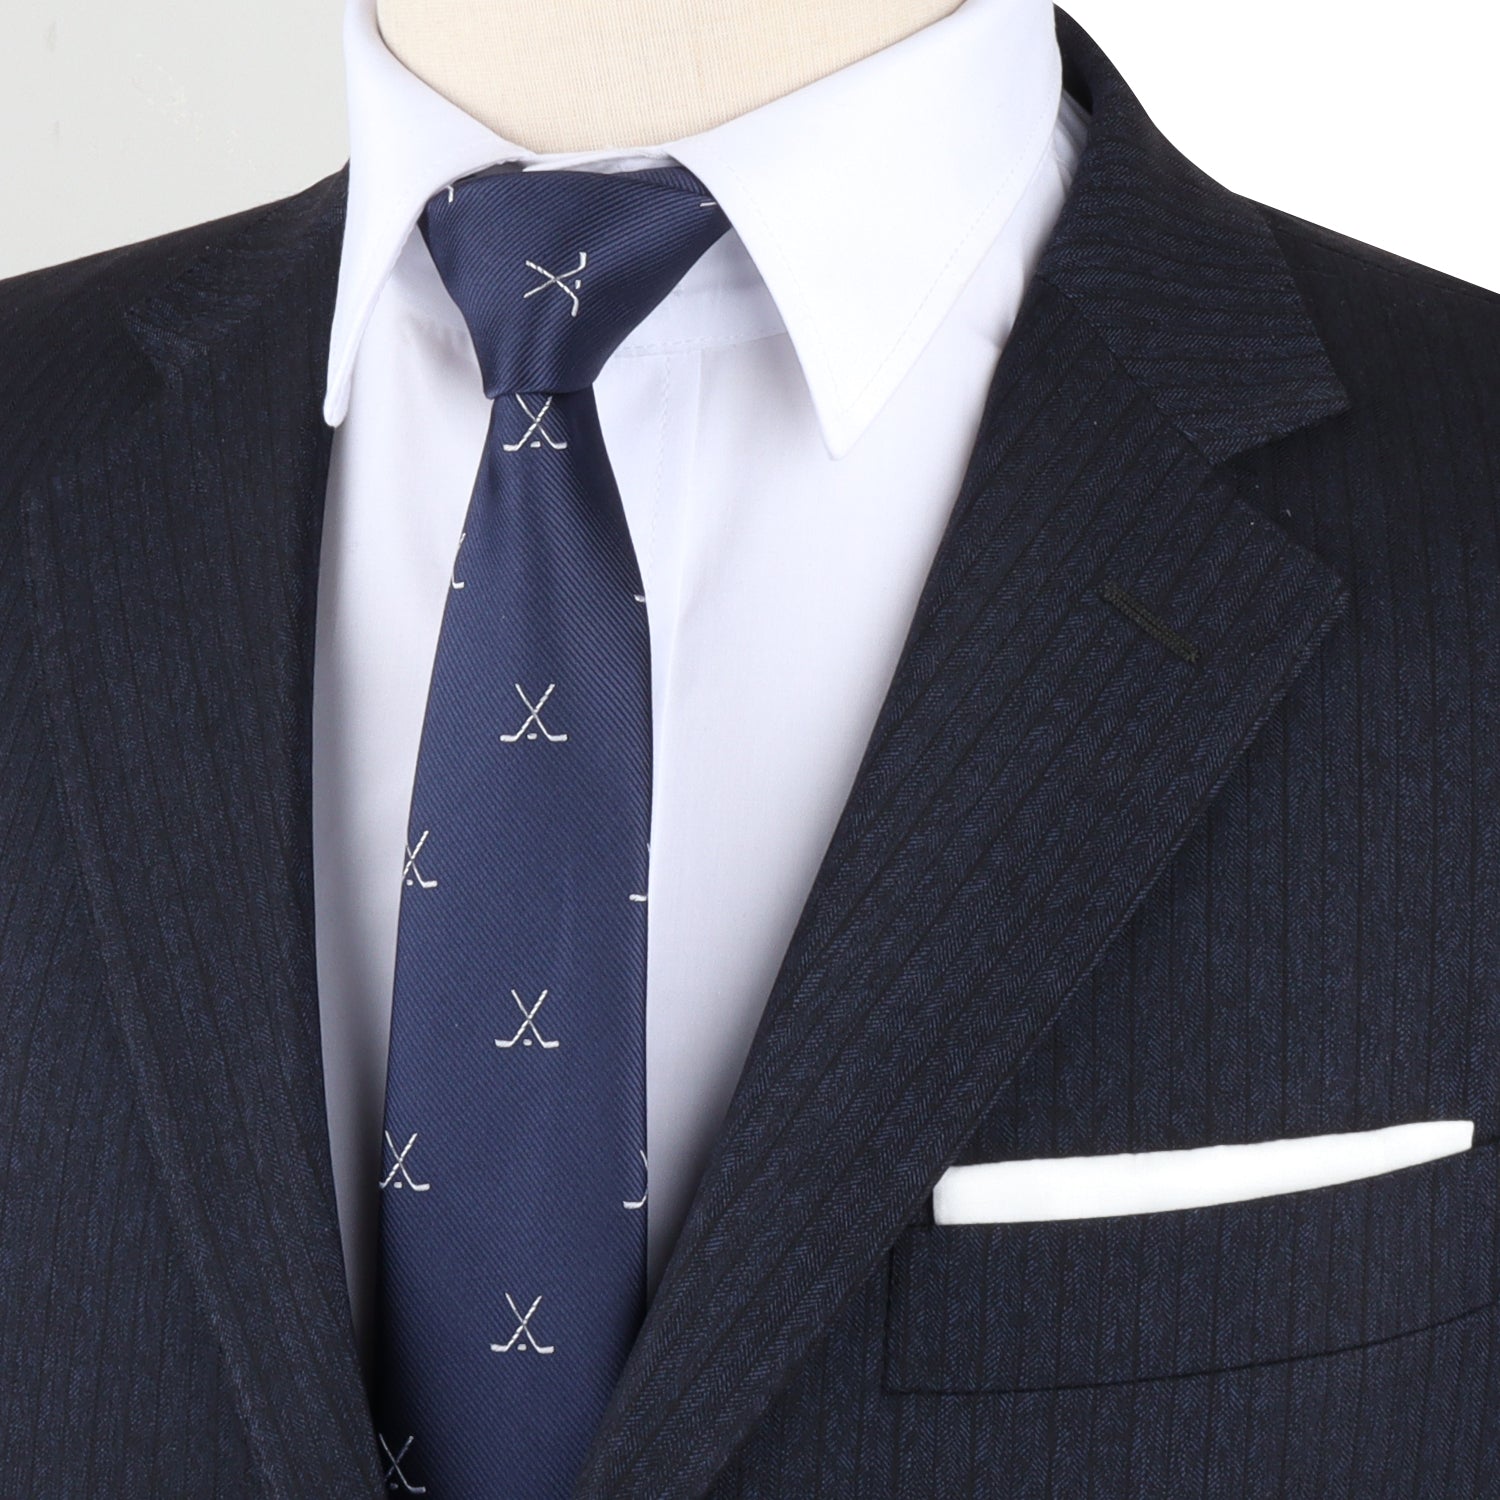 A mannequin wearing a stylish blue suit and Crossed Ice Hockey Skinny Tie, earning high style points.